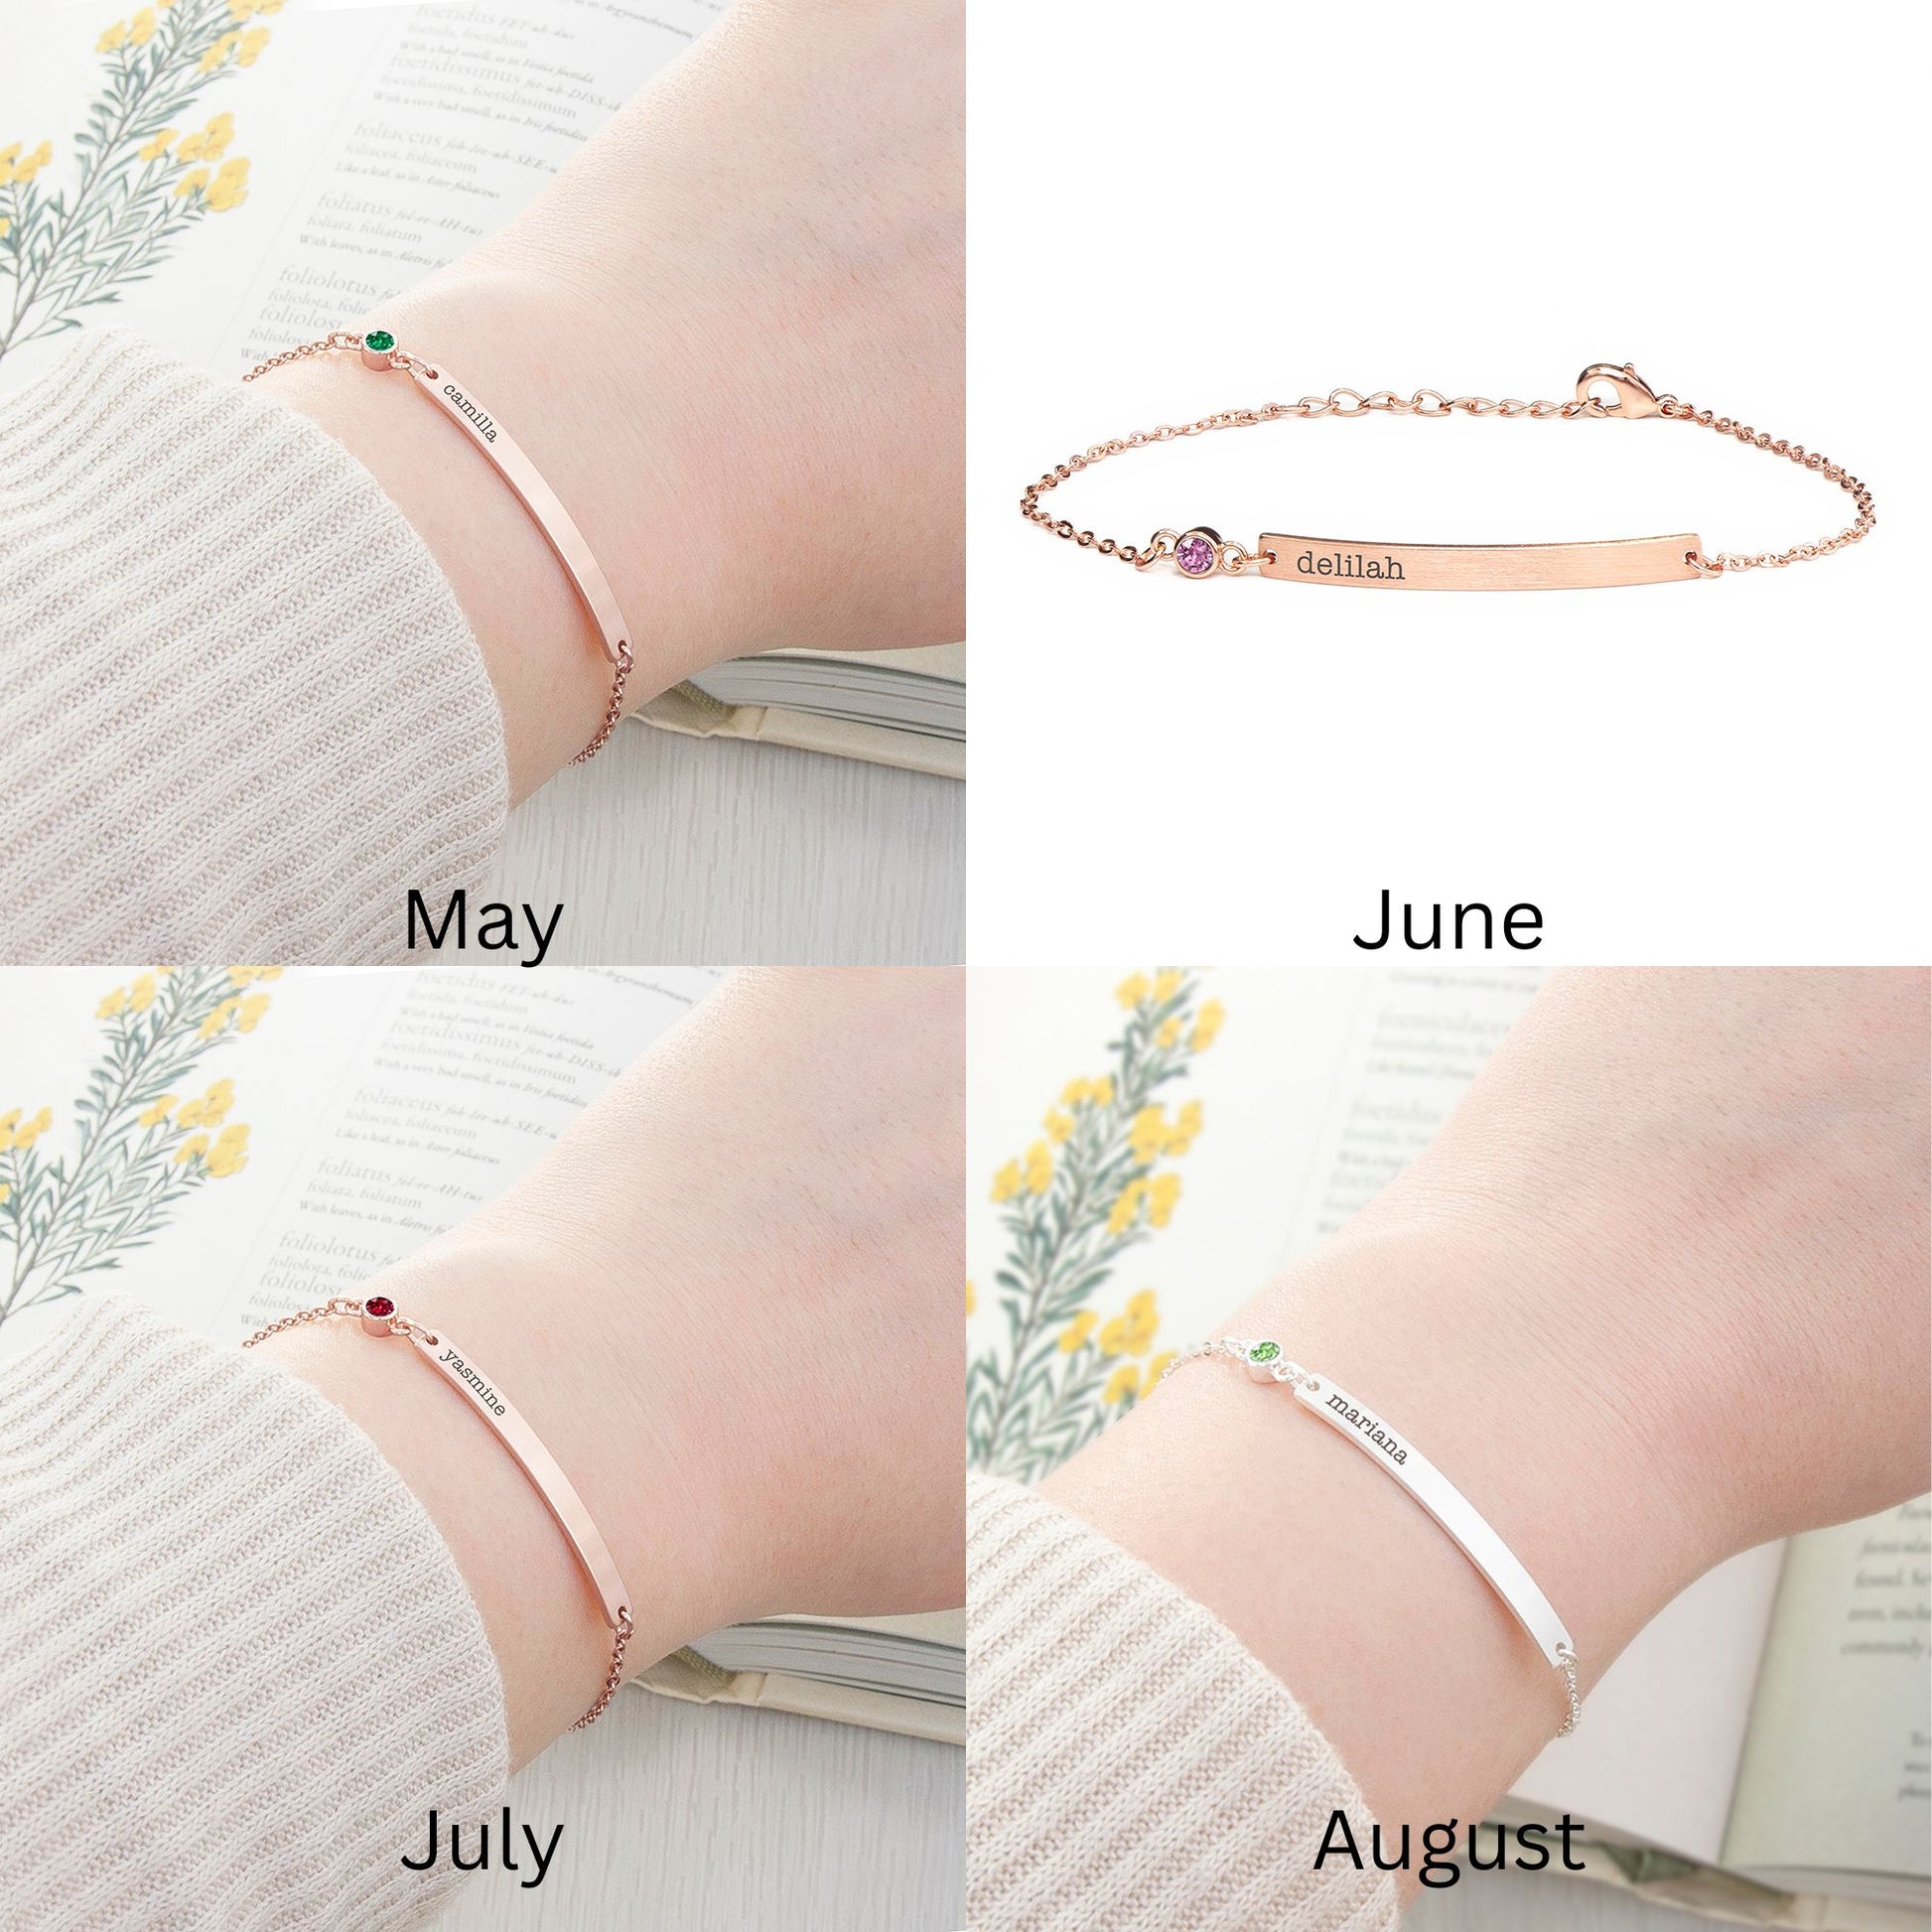 Birthstones for May to August